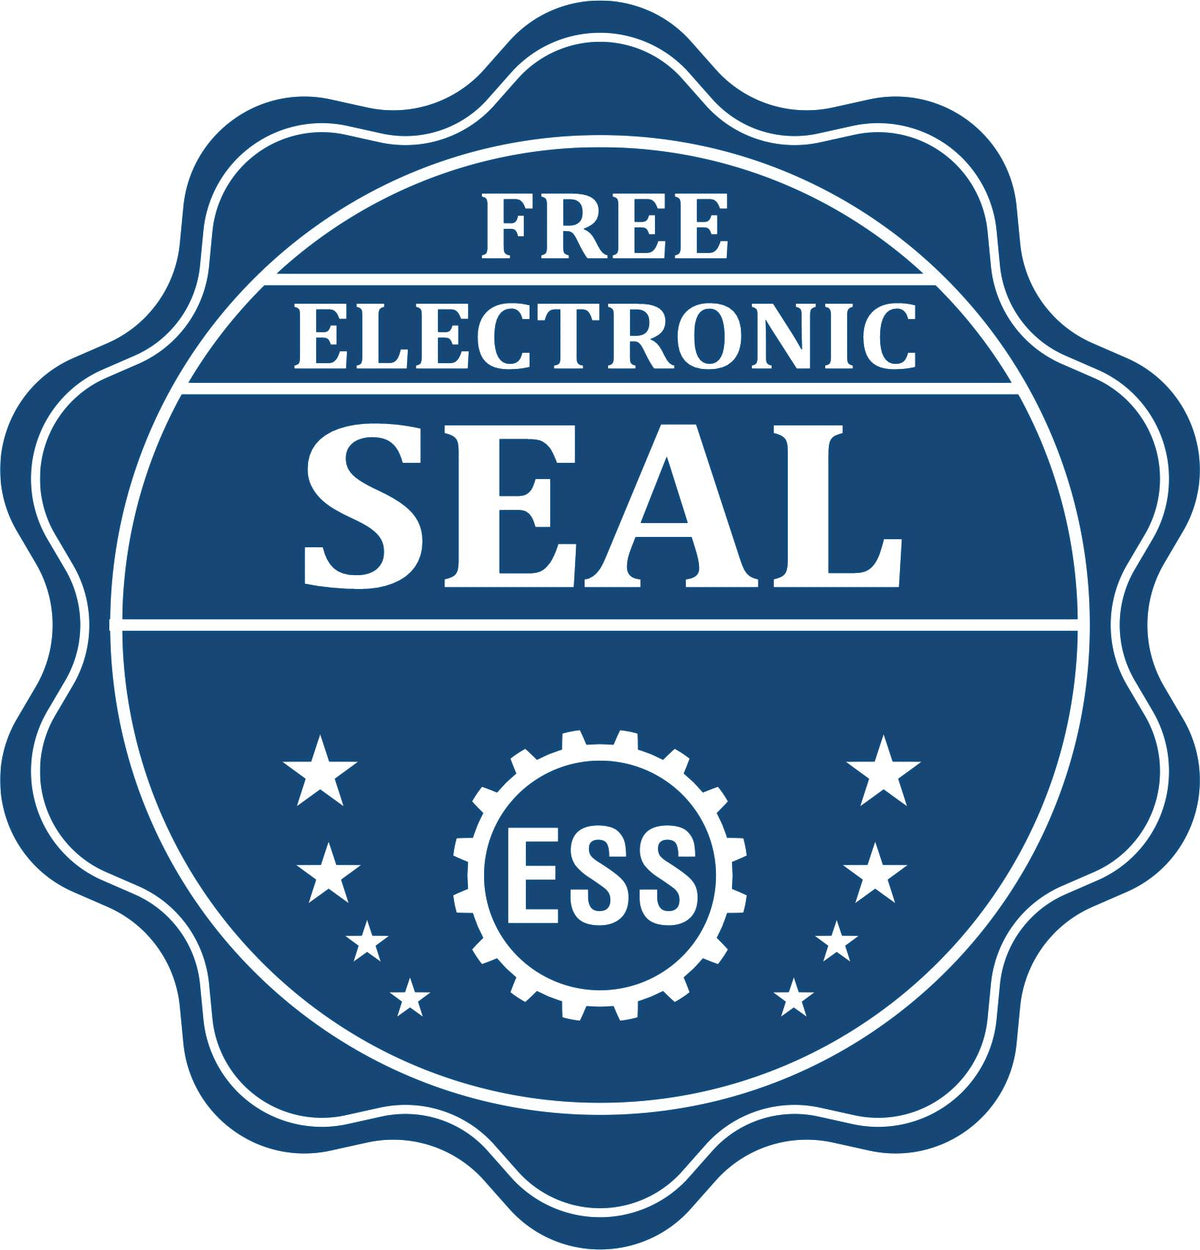 A badge showing a free electronic seal for the Handheld North Dakota Professional Geologist Embosser with stars and the ESS gear on the emblem.